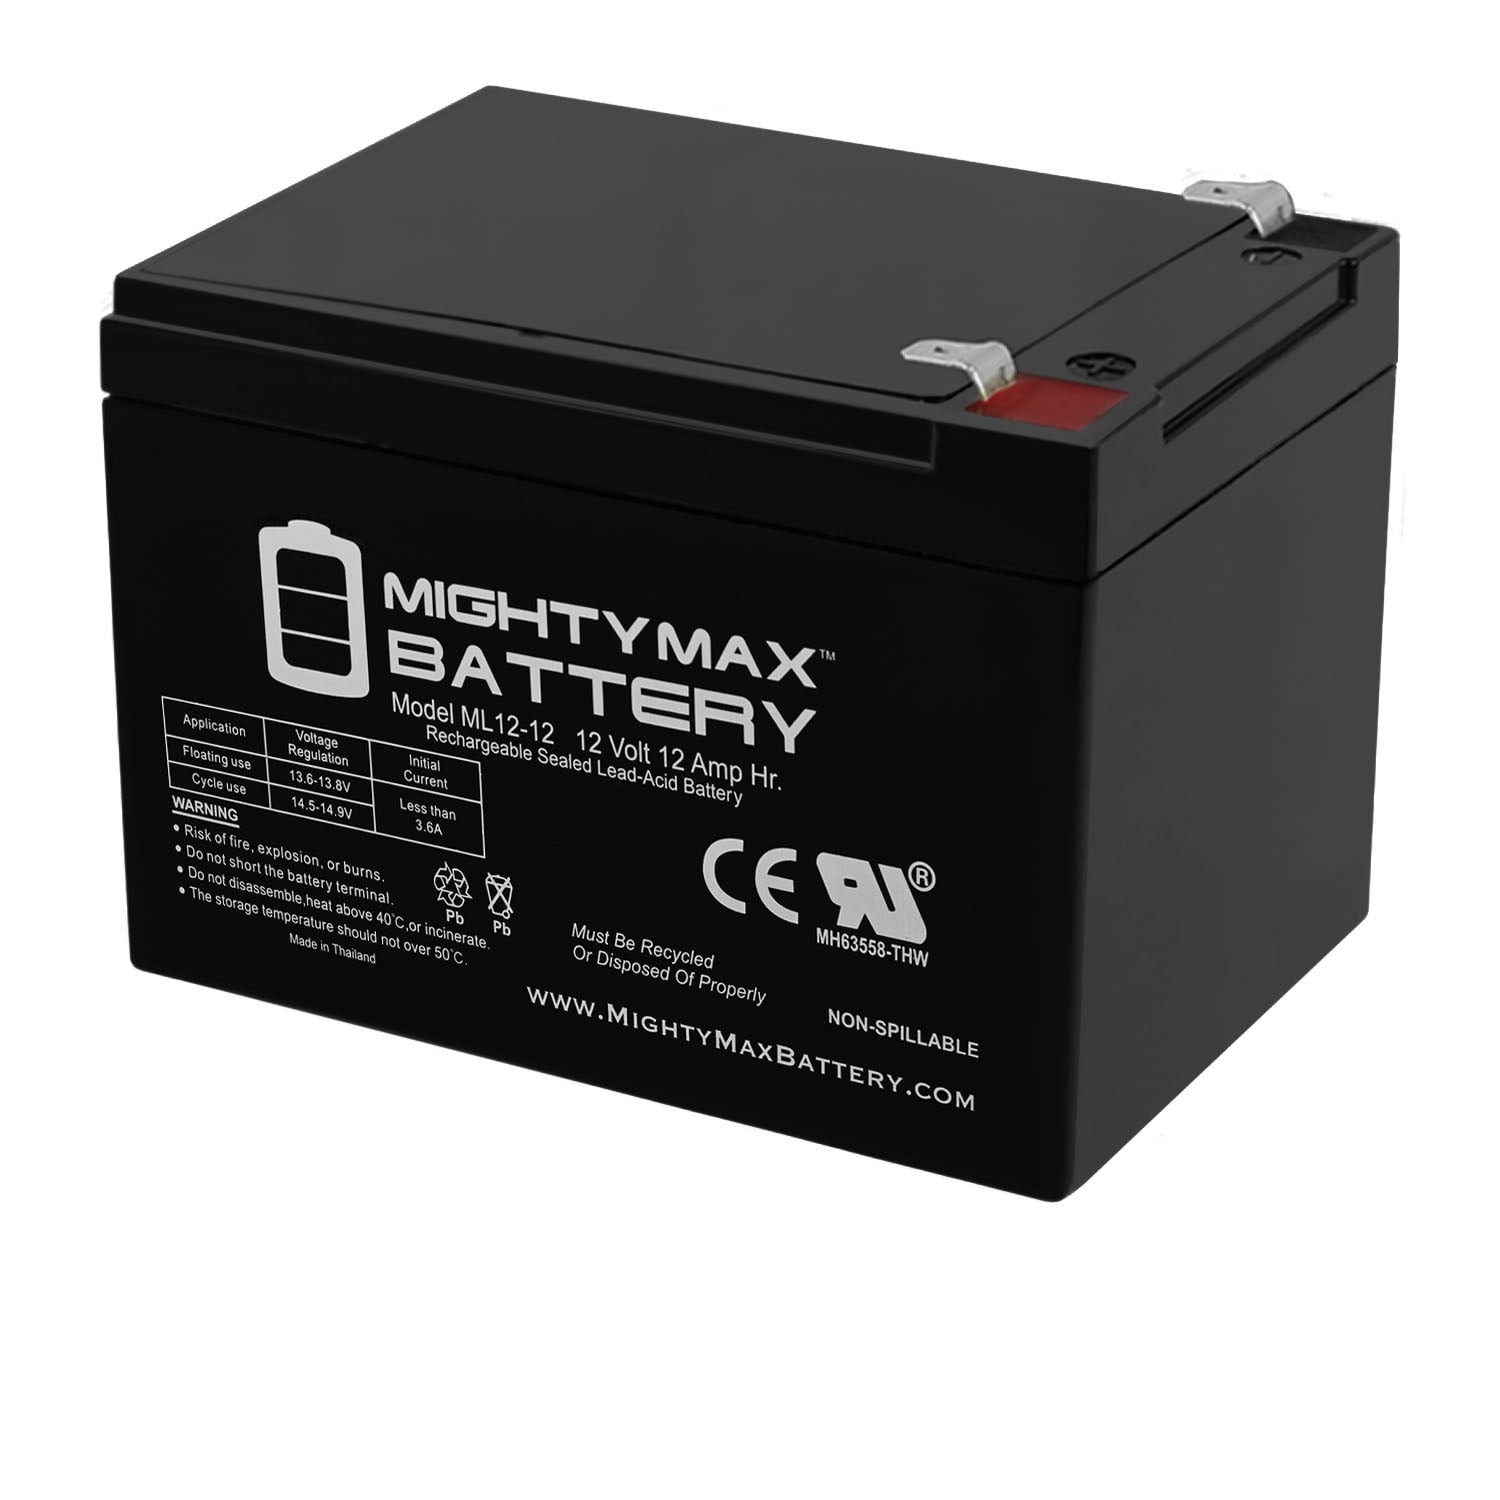 Replacement 12V 12AH SLA Battery for Peg Perego Gator HPX Toy or Riding Car 